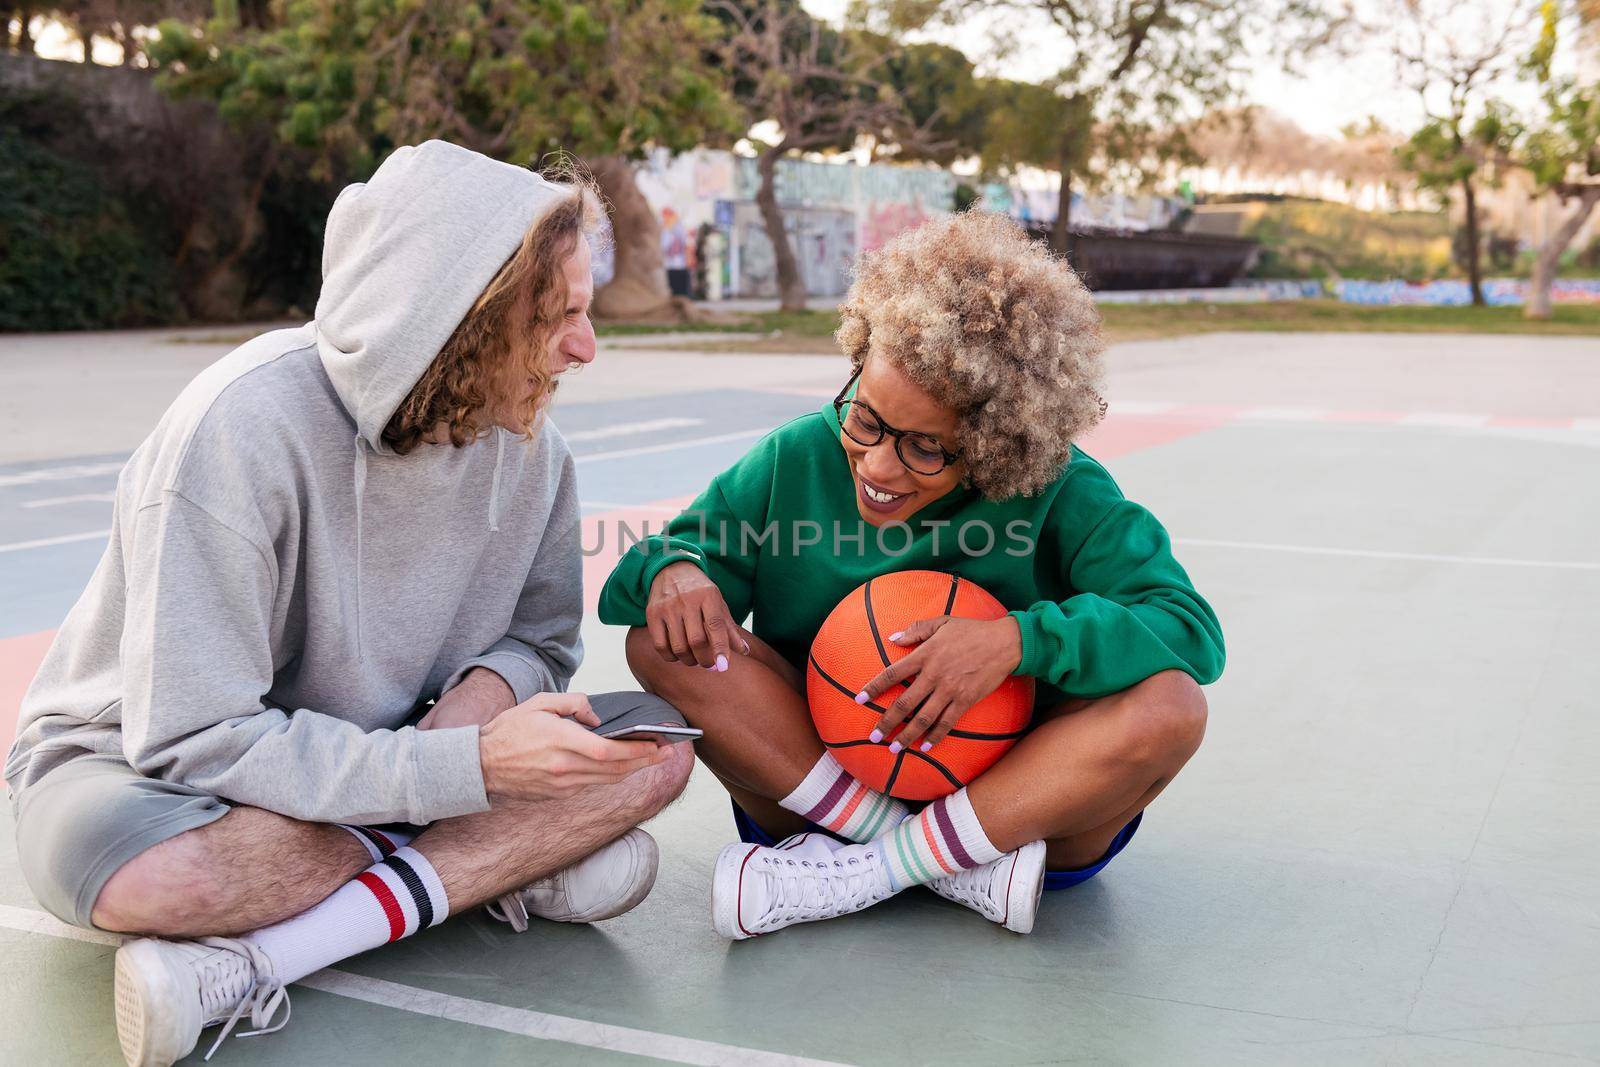 man and woman rest and have fun looking at the phone after basketball practice in a city park, concept of friendship and urban sport in the street, copy space for text